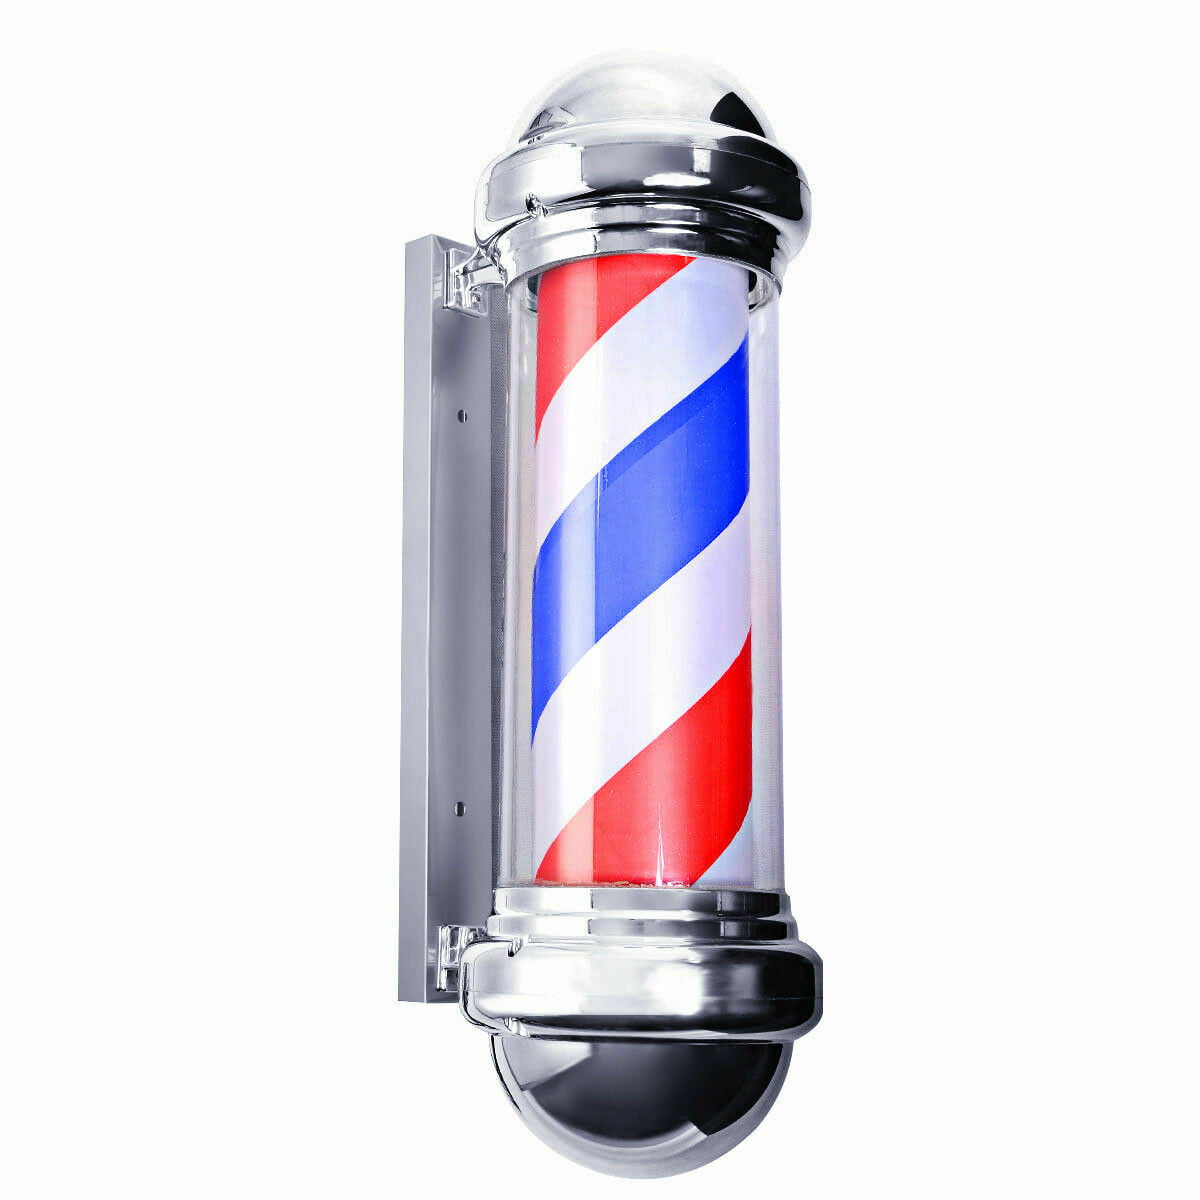 Rotating & Illuminated Hair Salon Sign Large Led Blue Red White Stripes Waterproof Hair Salon Shop Sign Wall-Mounted Led Barber Pole Light 